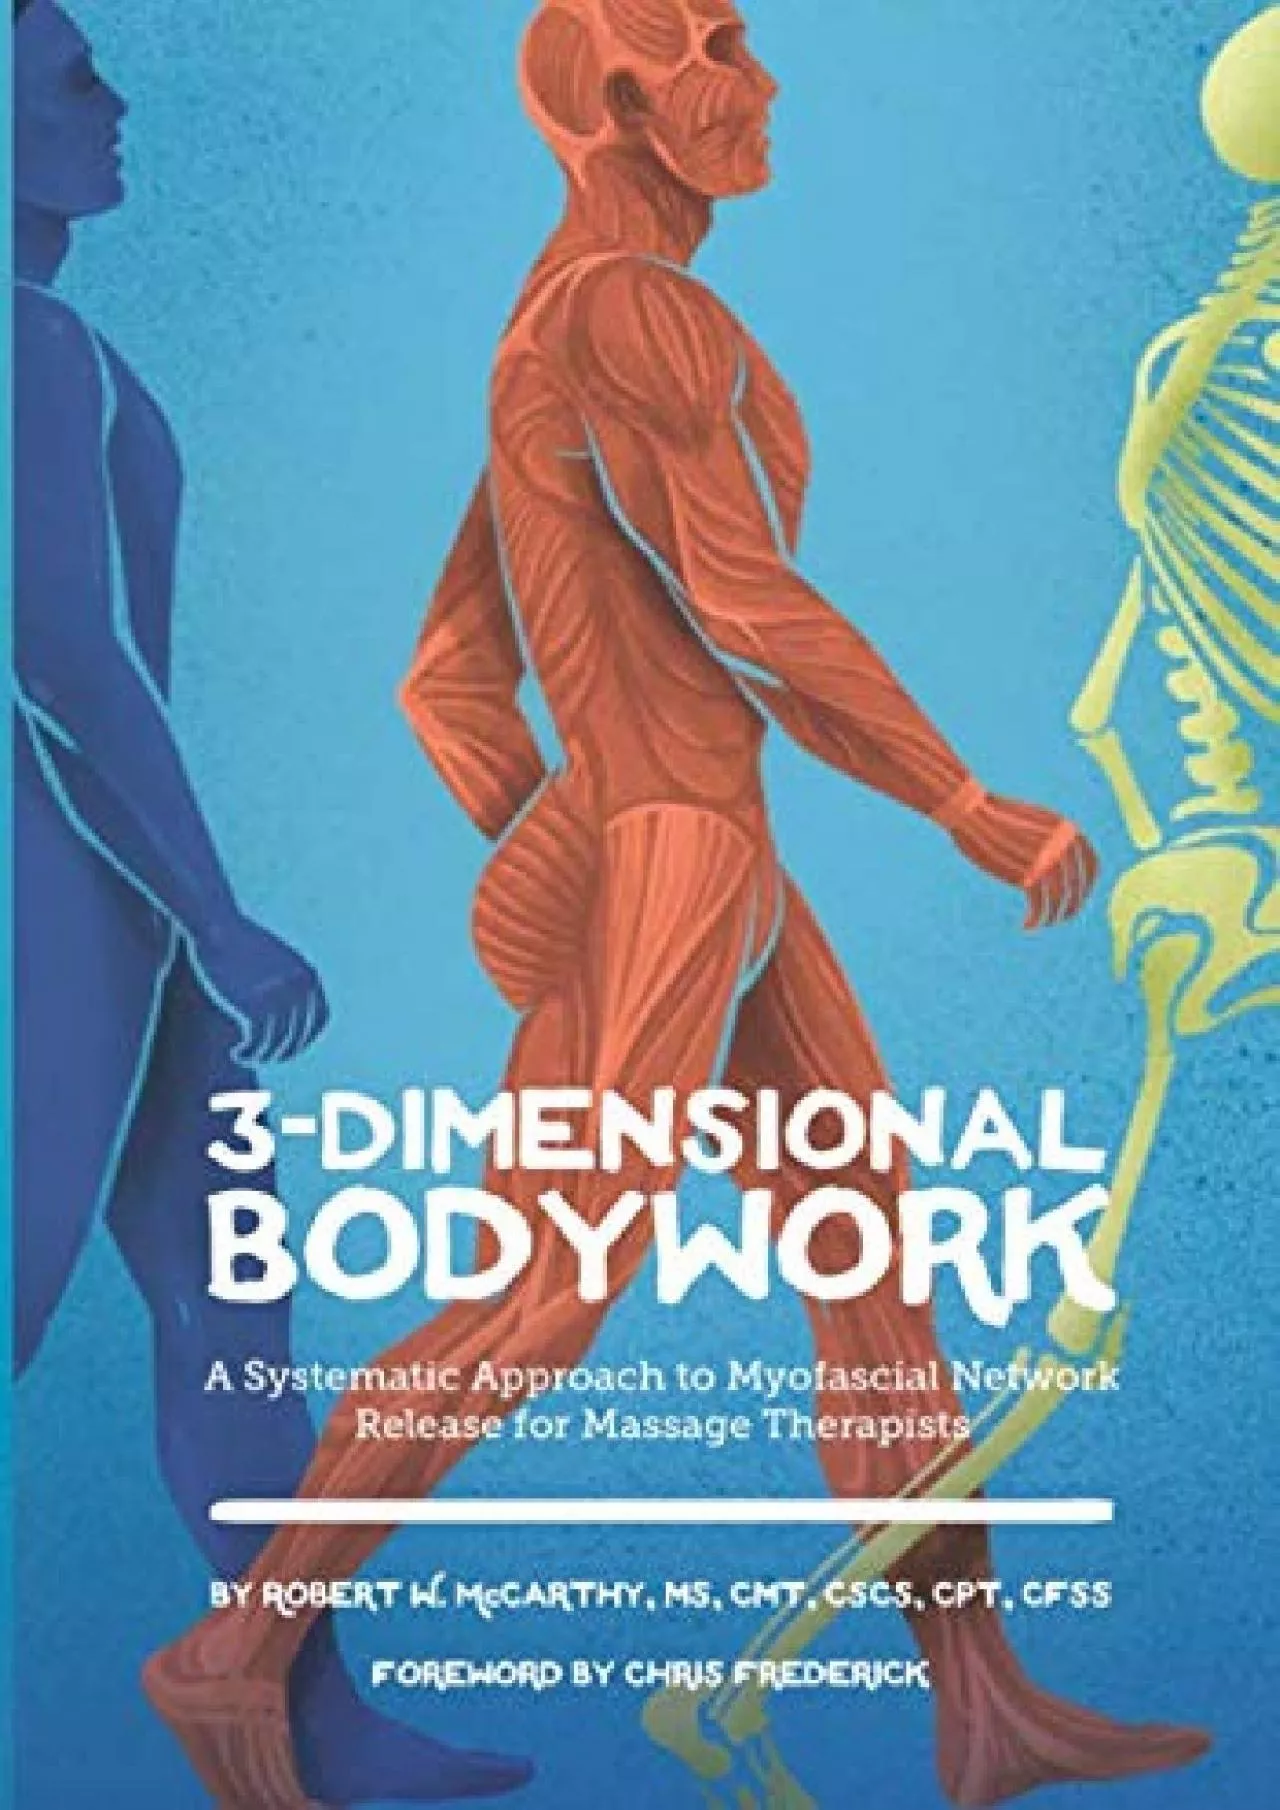 [READ] 3-Dimensional Bodywork: A Systematic Approach to Myofascial Network Release for